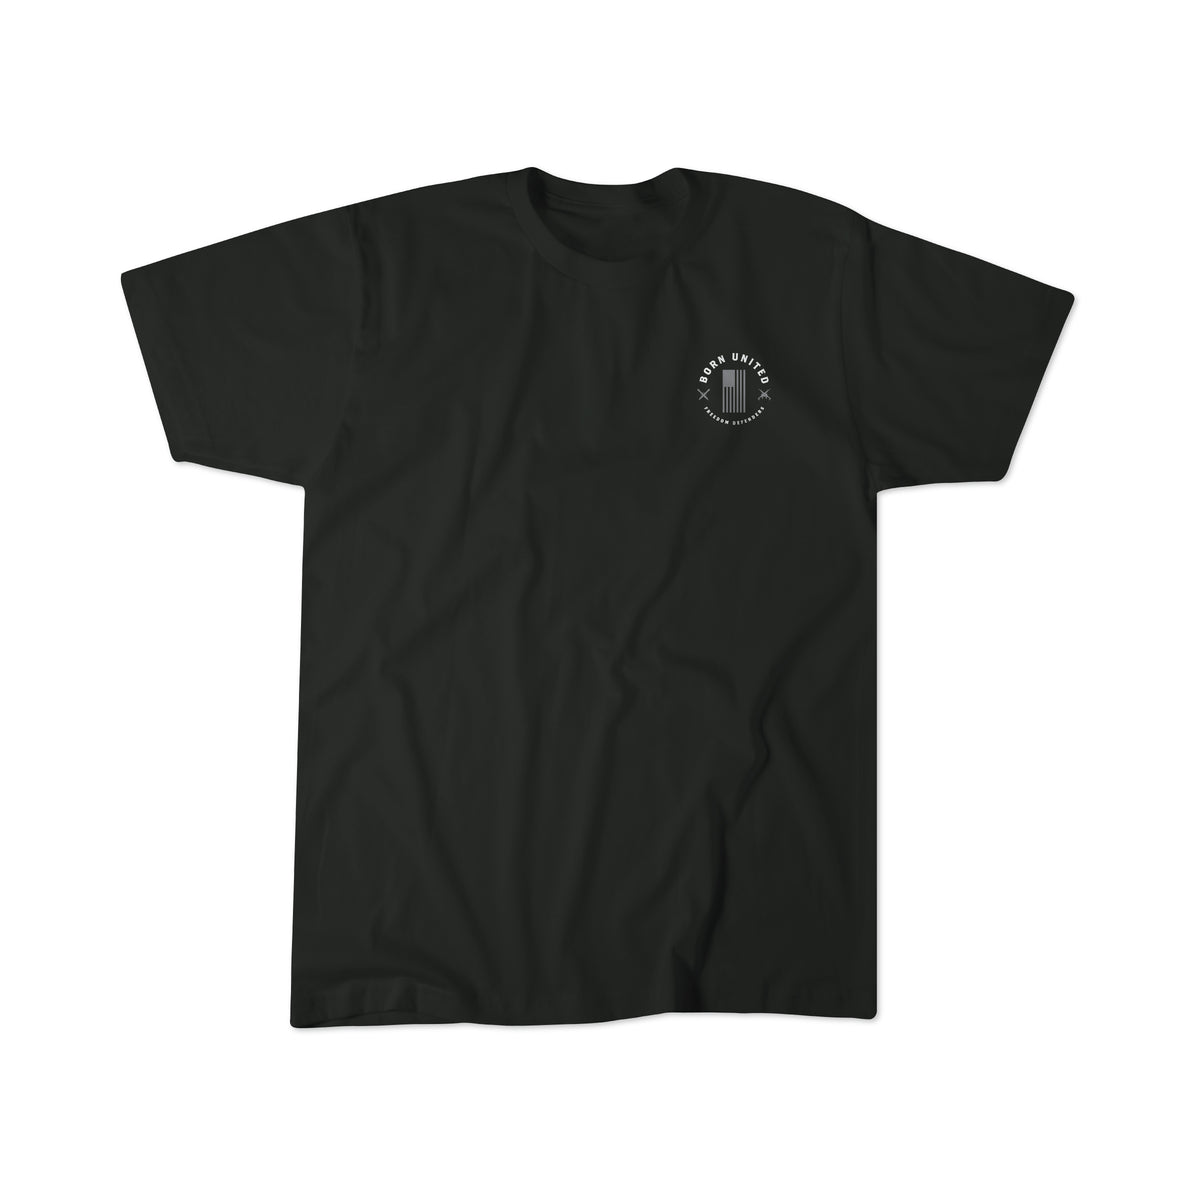 Stay Deadly Tee - Black